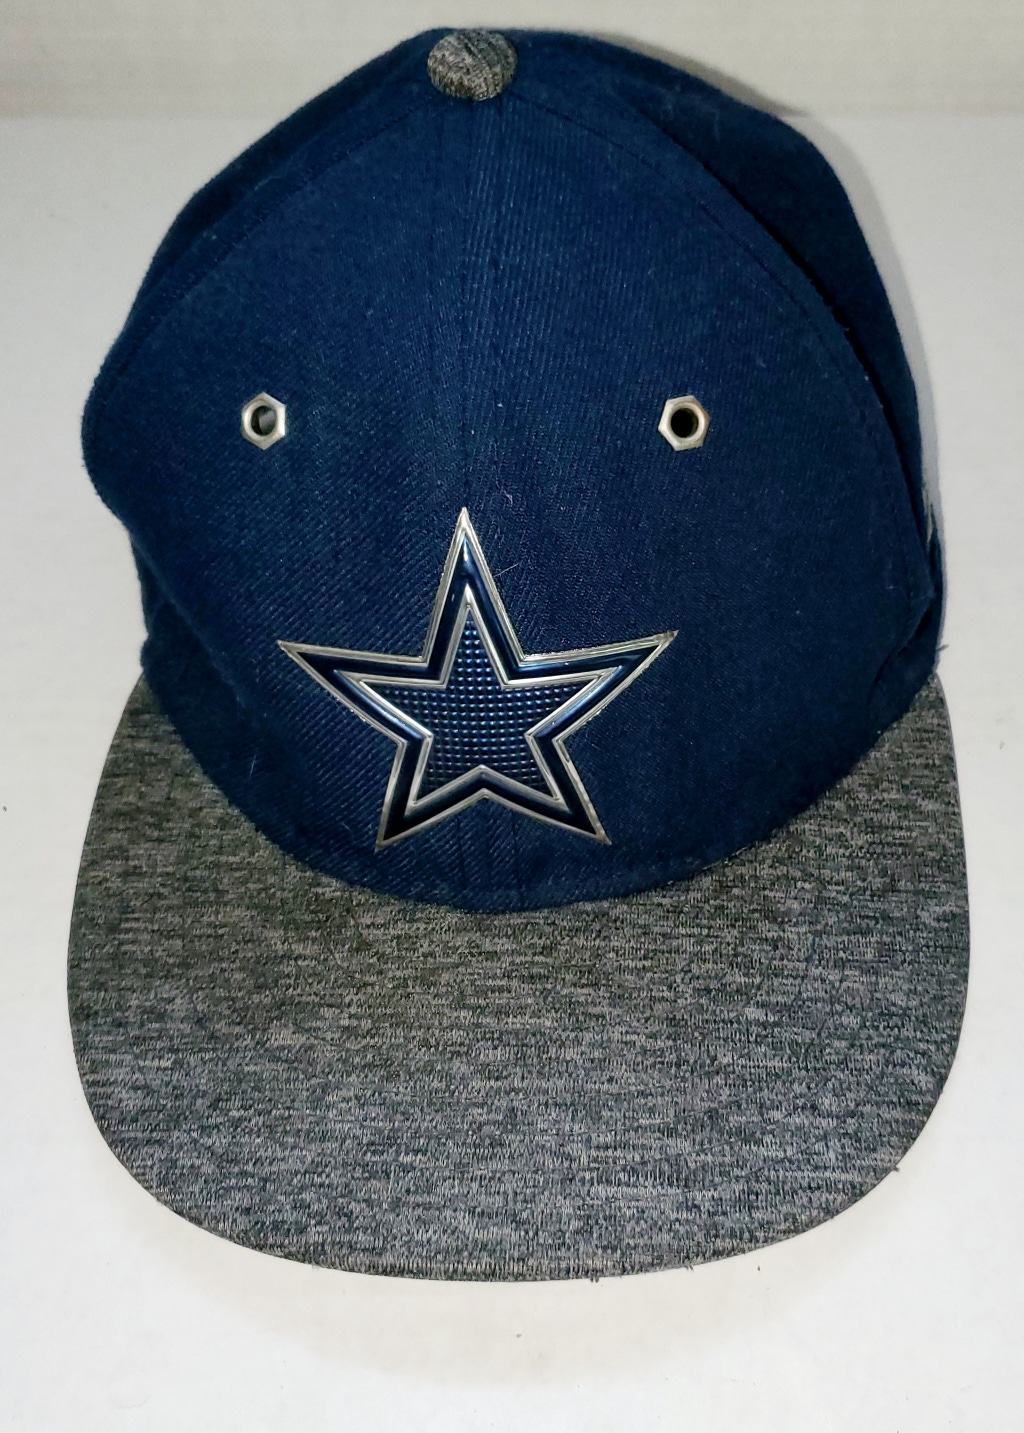 Dallas Cowboys New Era 59Fifty Fitted Hat